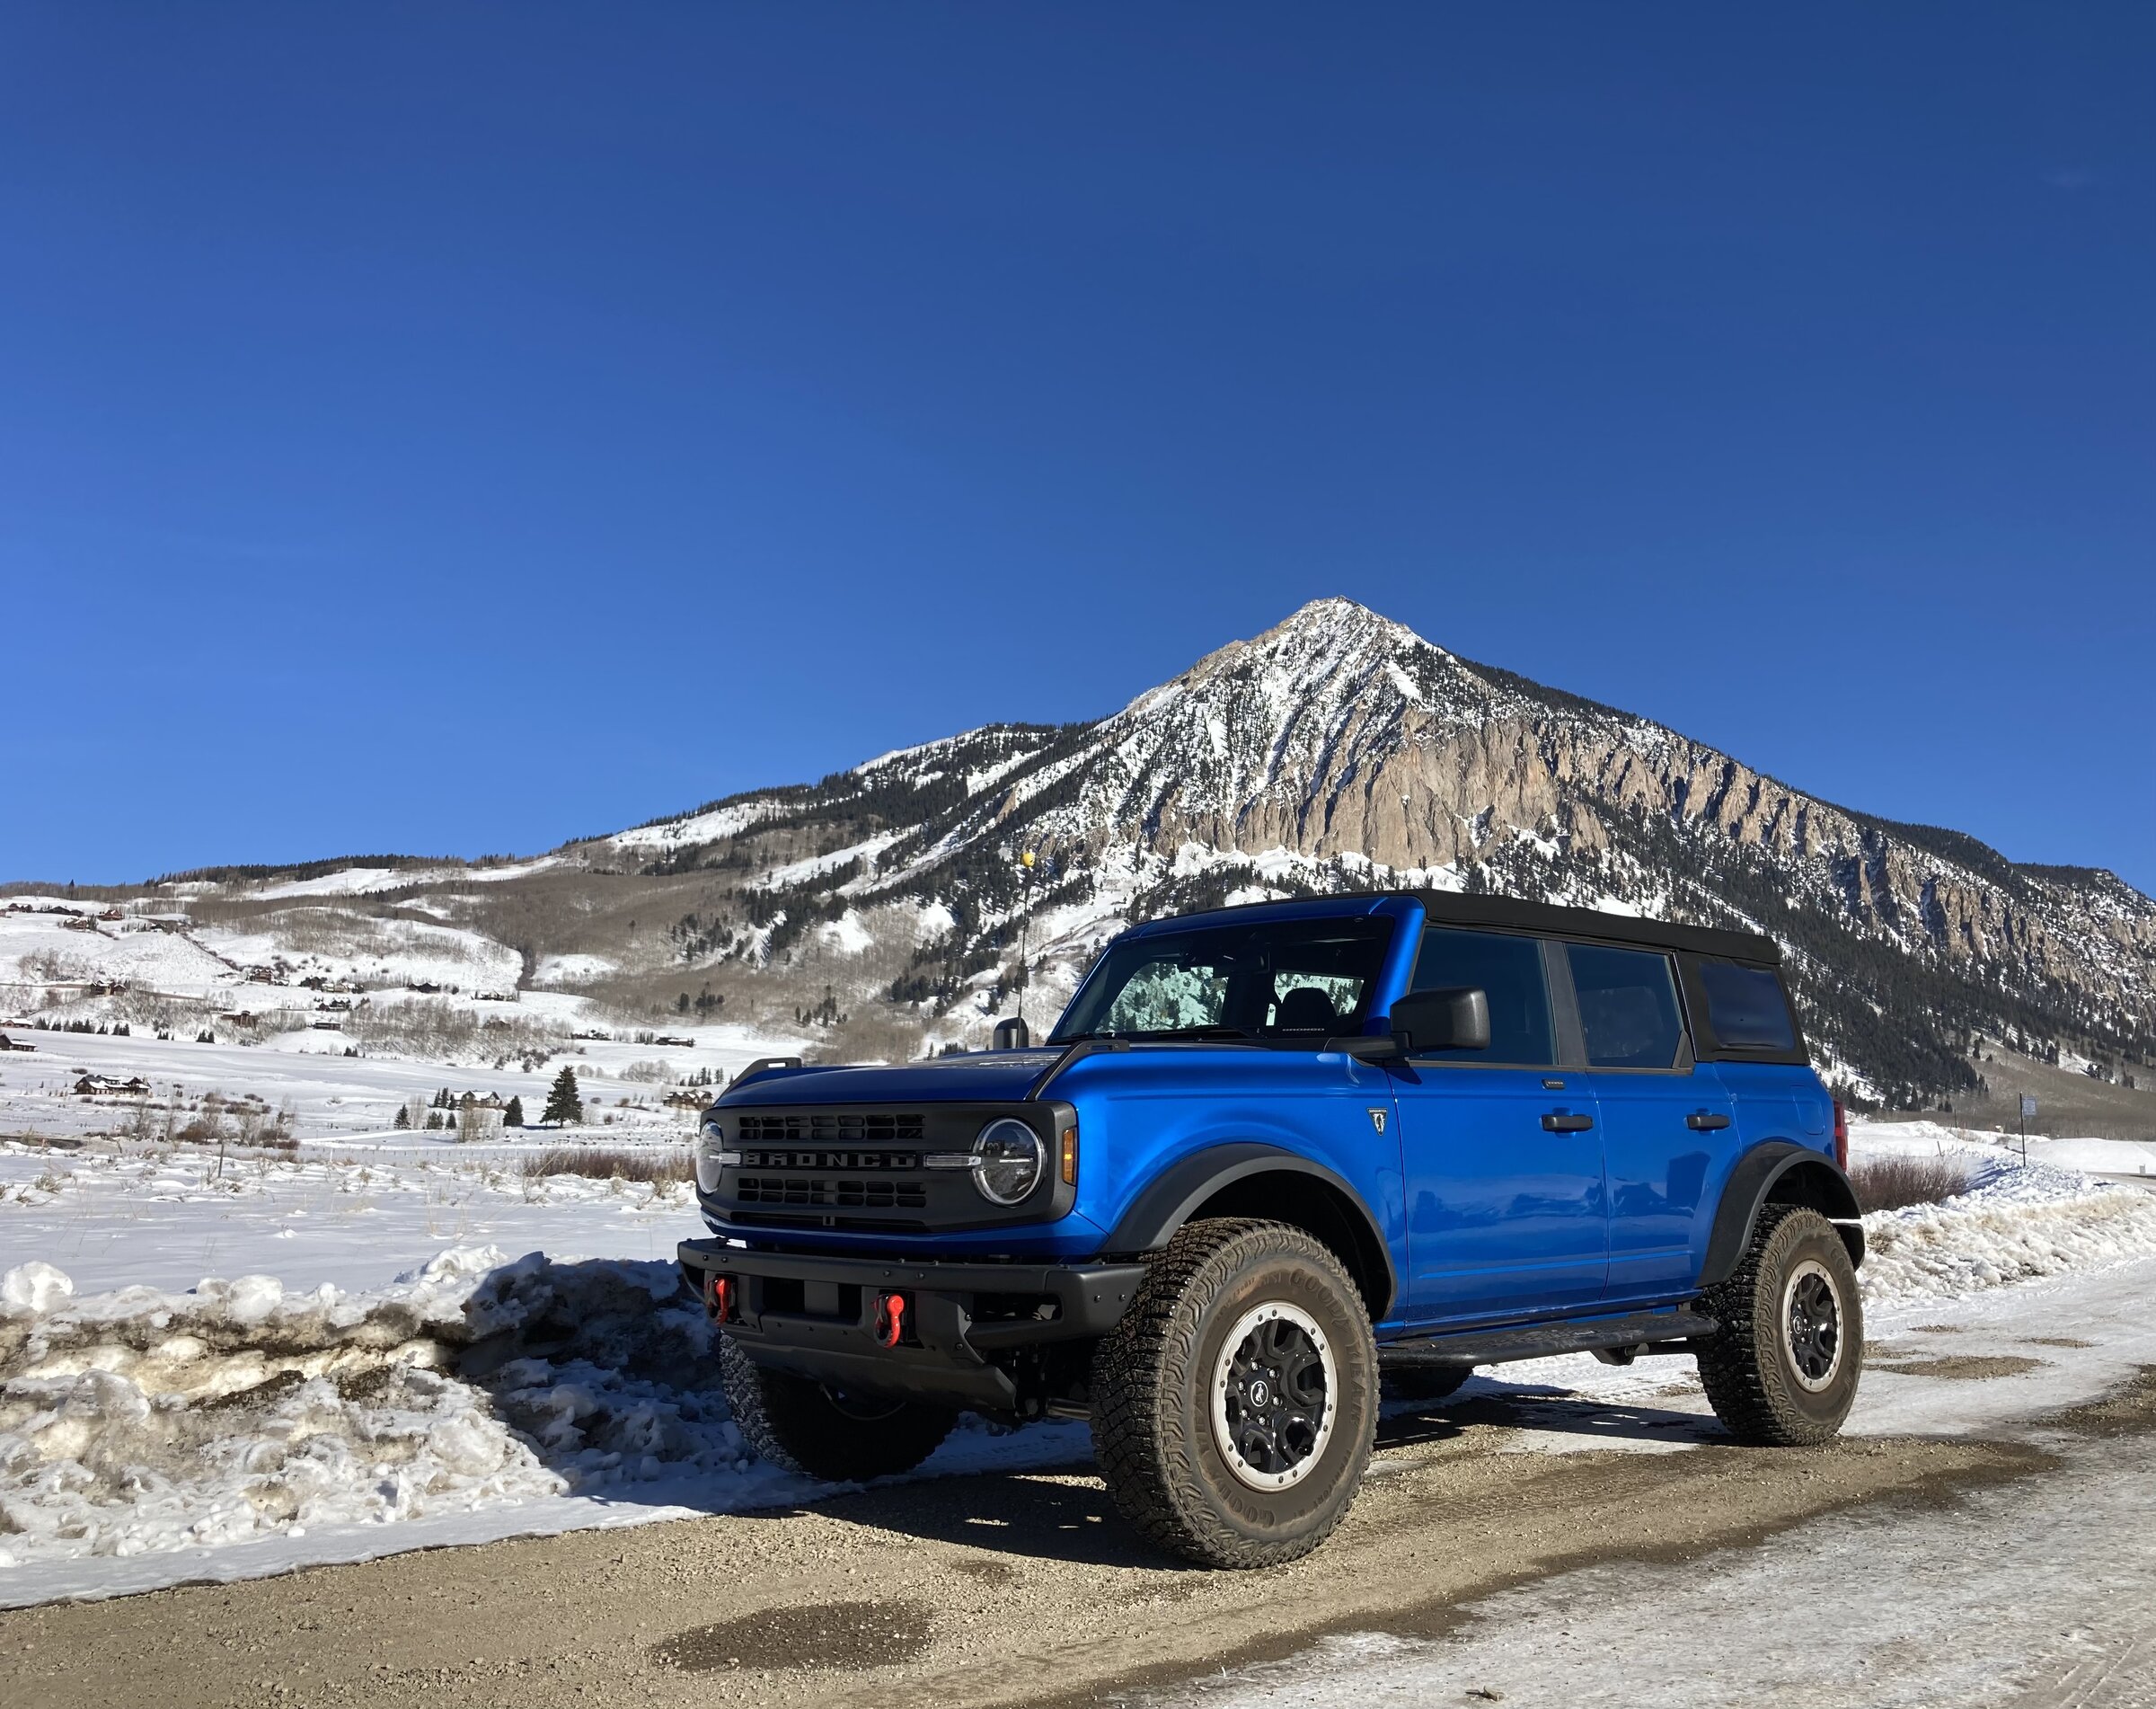 Ford Bronco Who’s got the Blues… 4C601737-2C9C-4FD2-AEF5-7AA074D49F8F